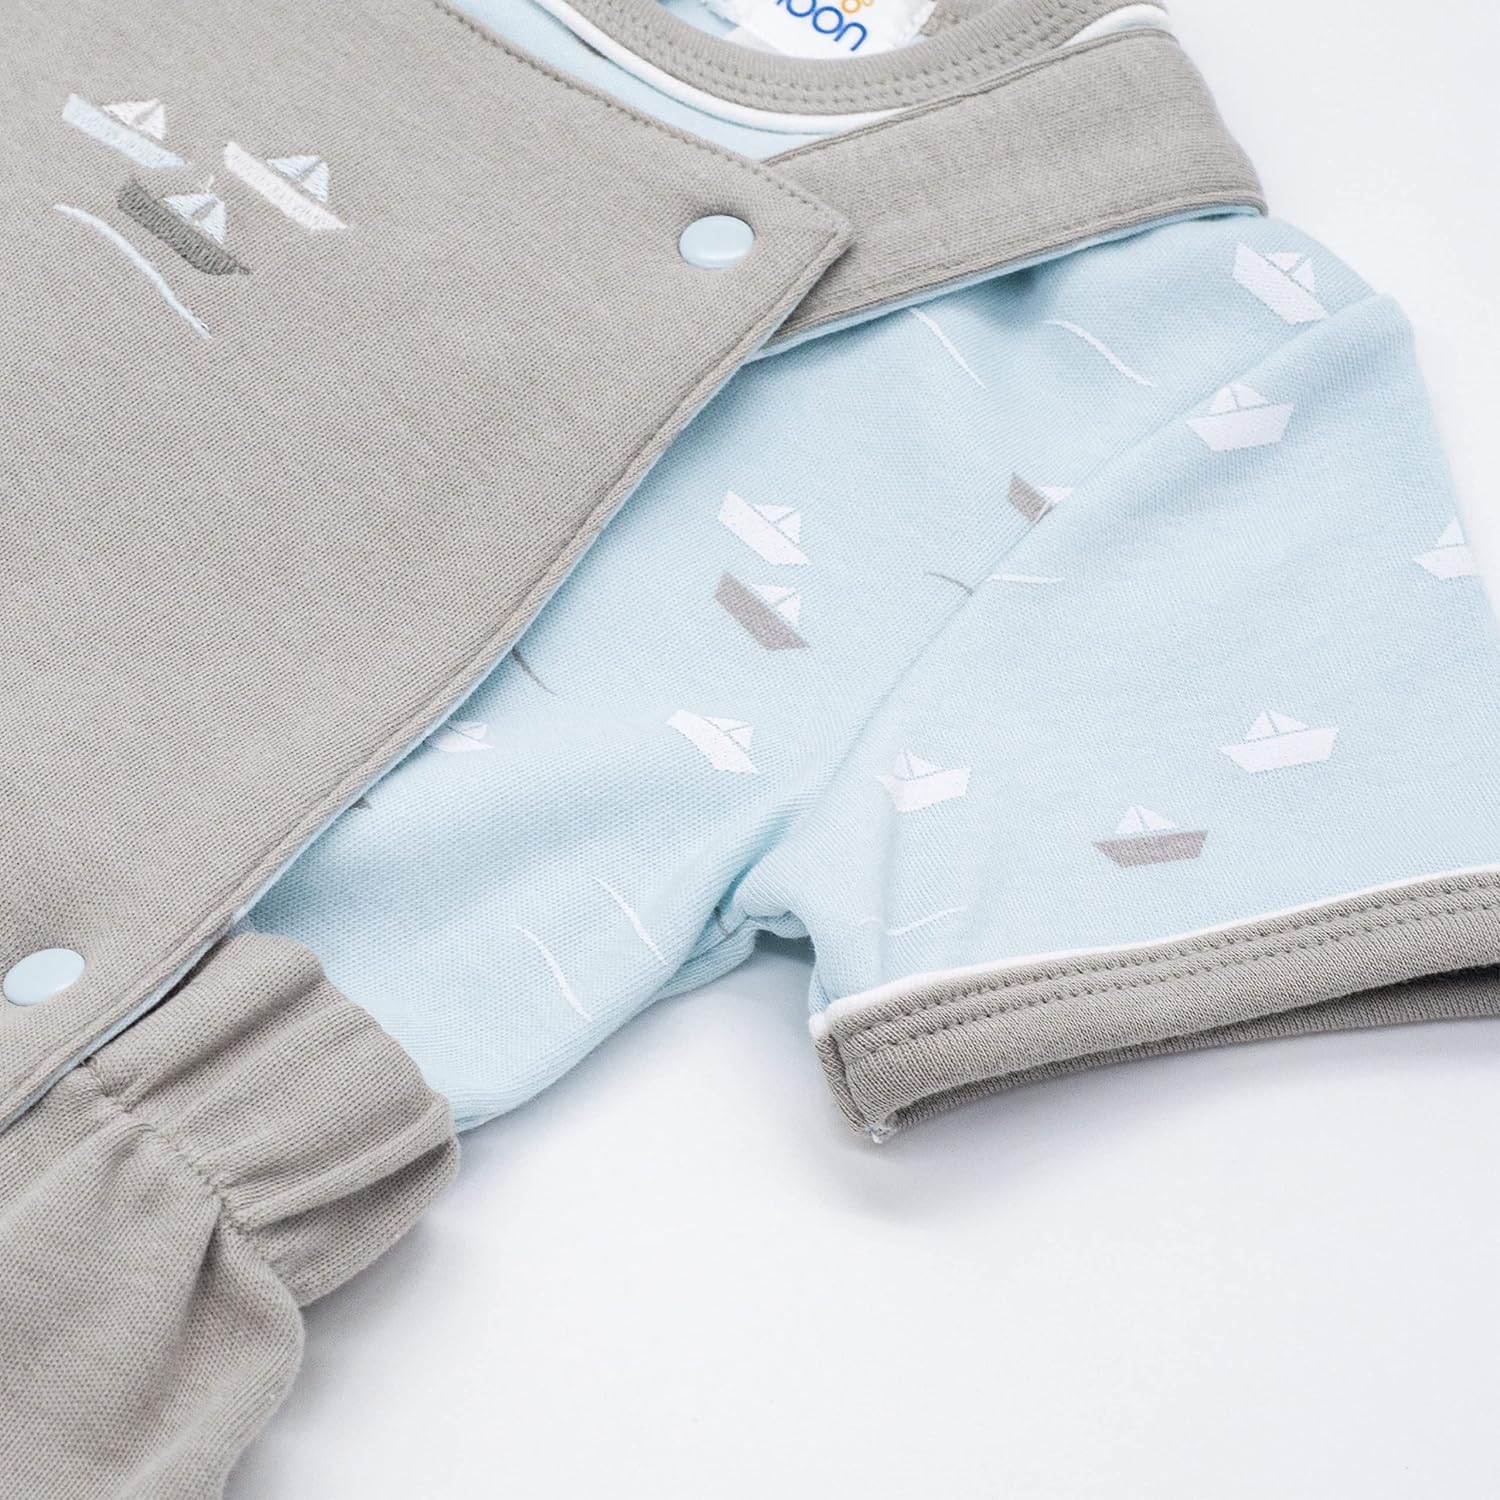 MOON 100% Cotton T-Shirt and Dungaree 6-12M Teal - Little Boat